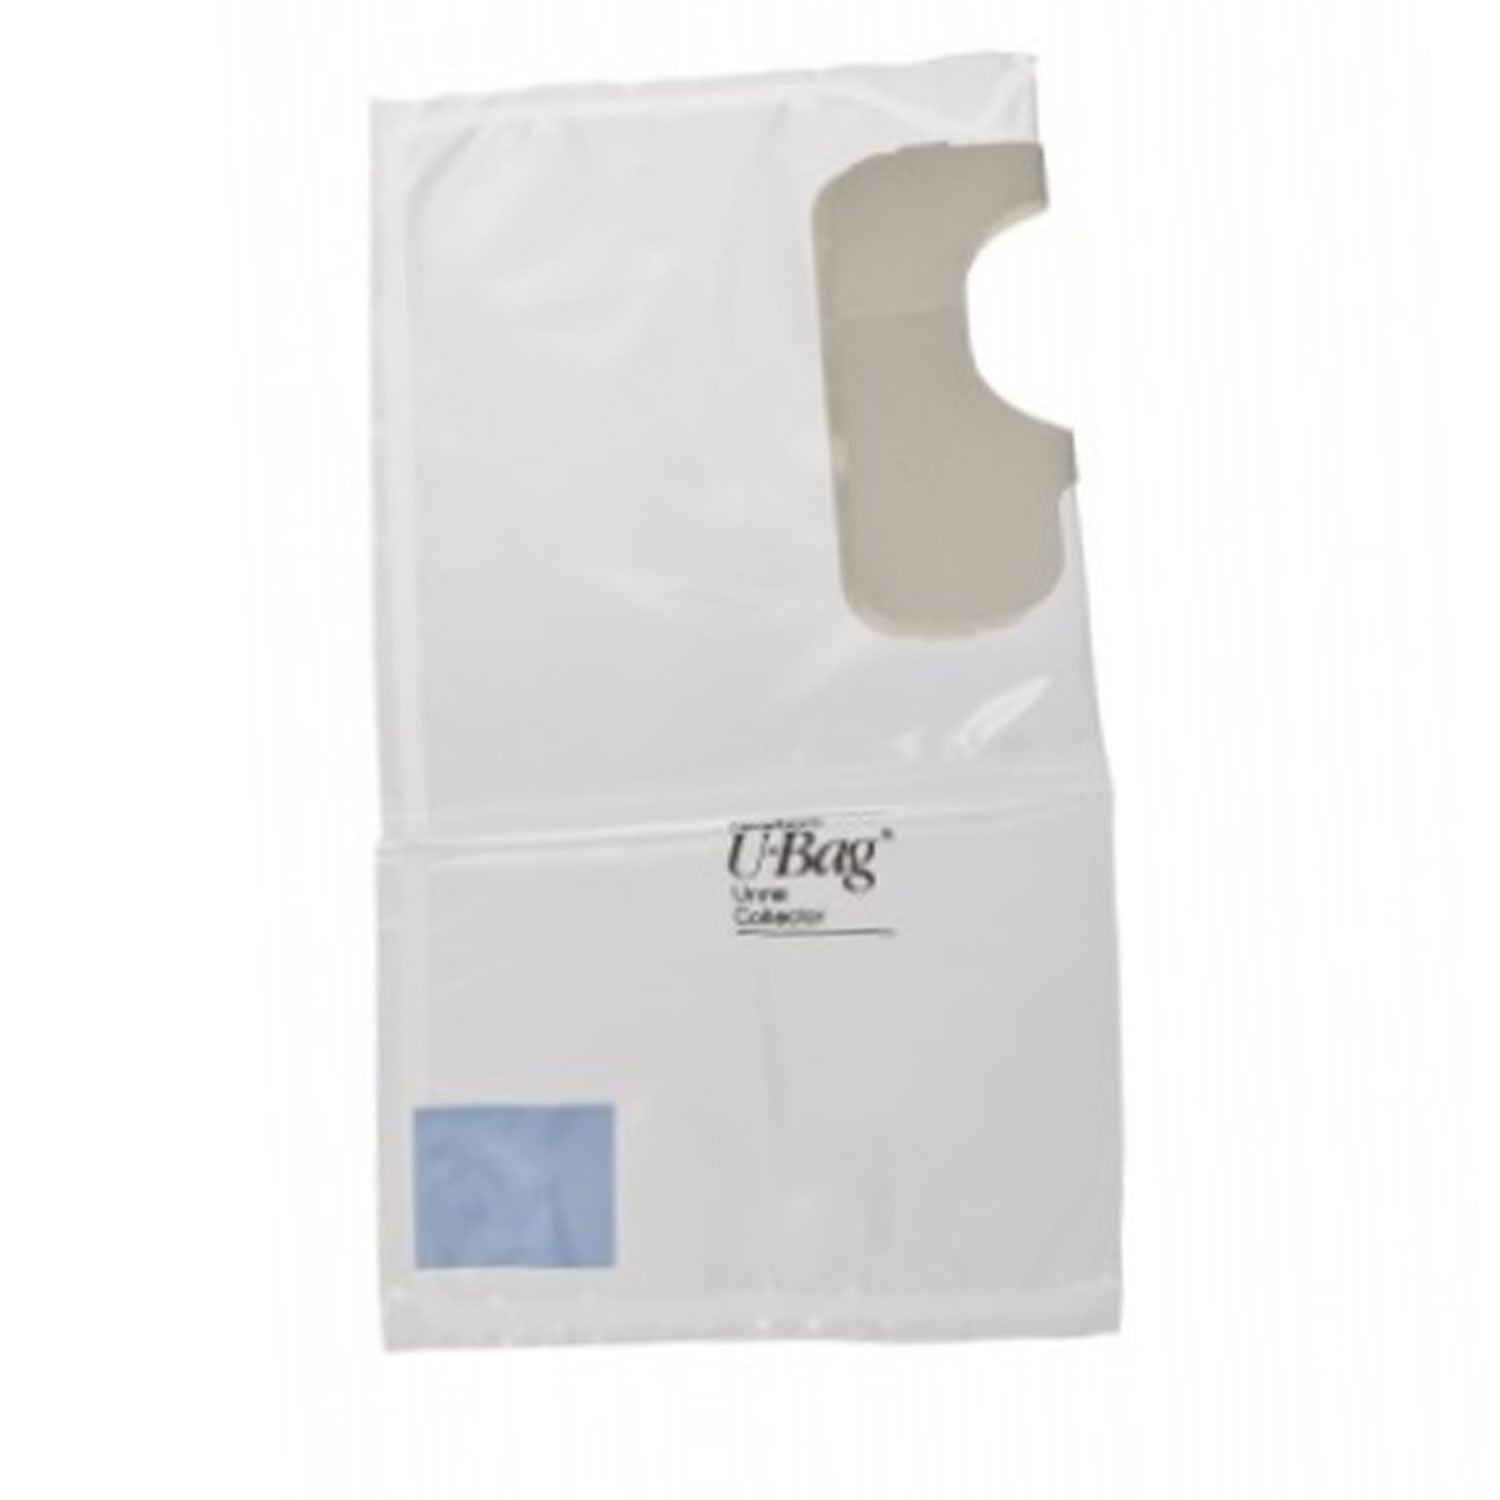 Urine Collection Bags | Newborn / Premature | Sterile | Pack of 100